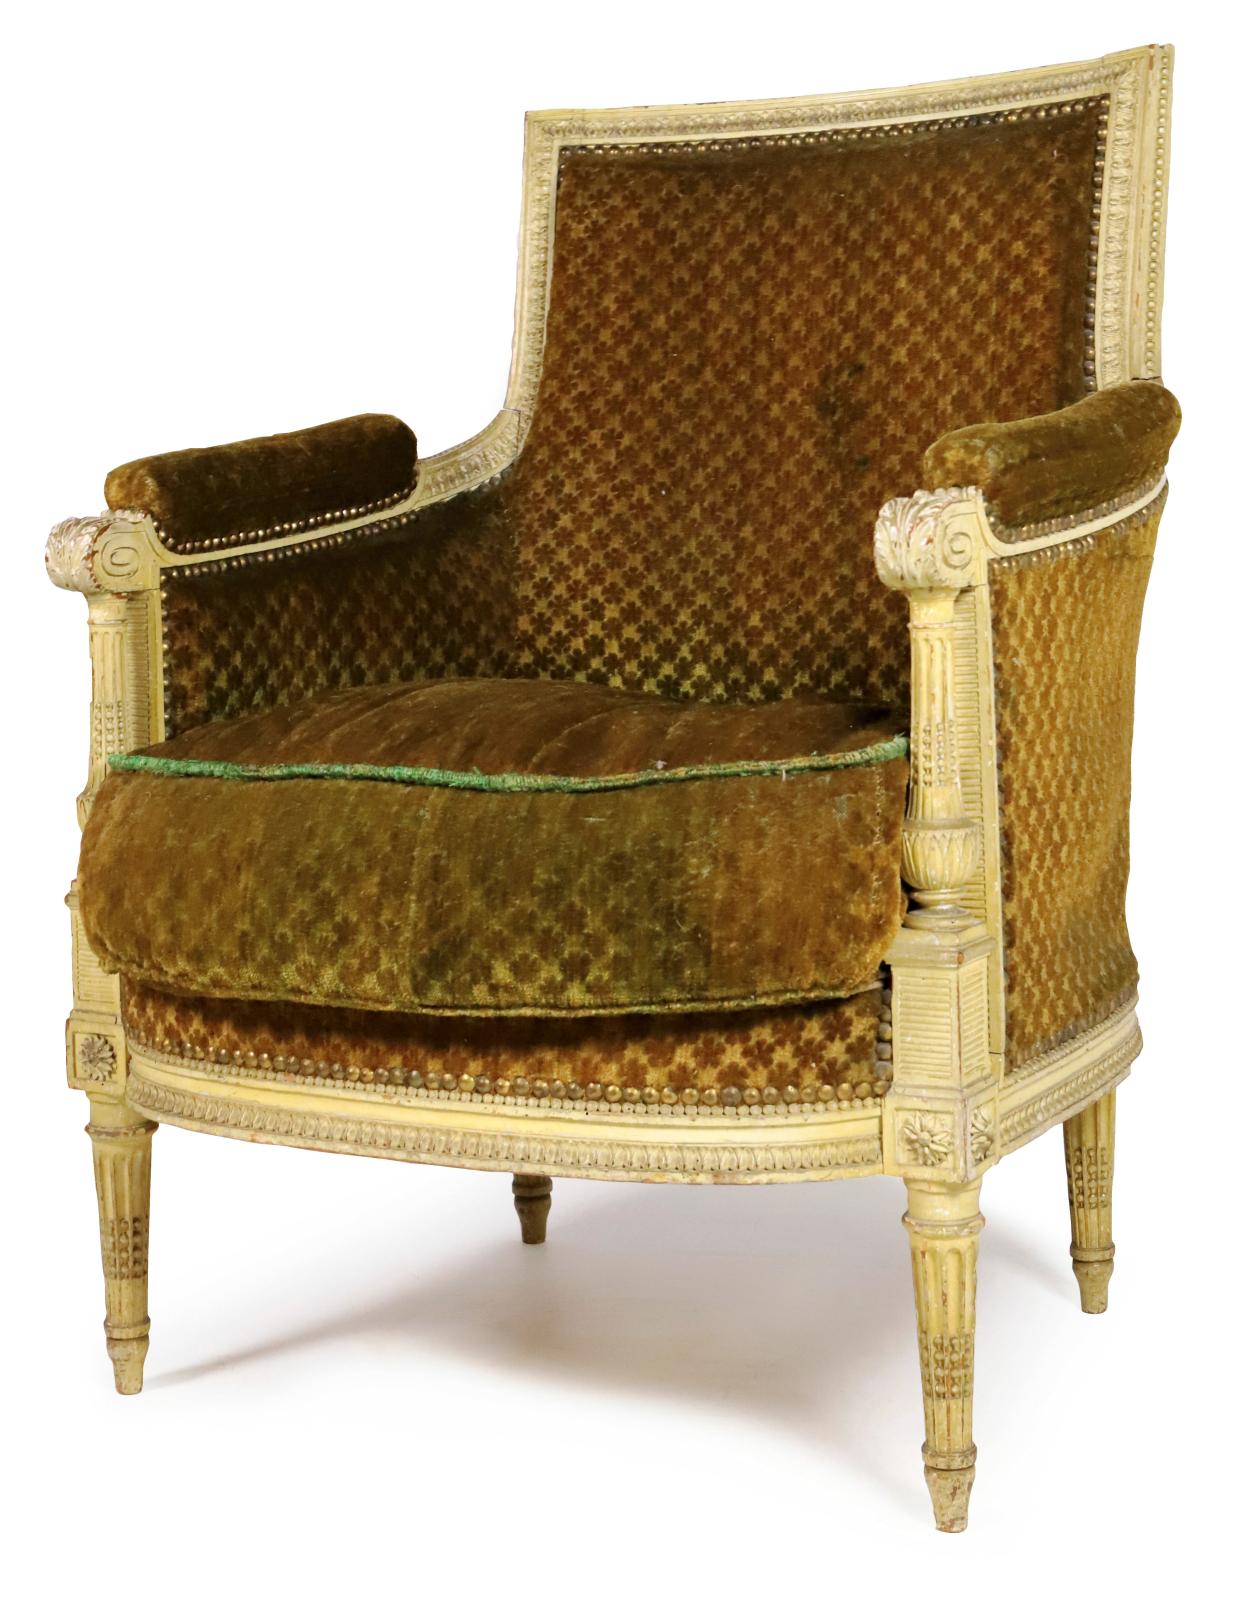 King Louis XVI's Sister and her Furniture from the Tuileries Palace